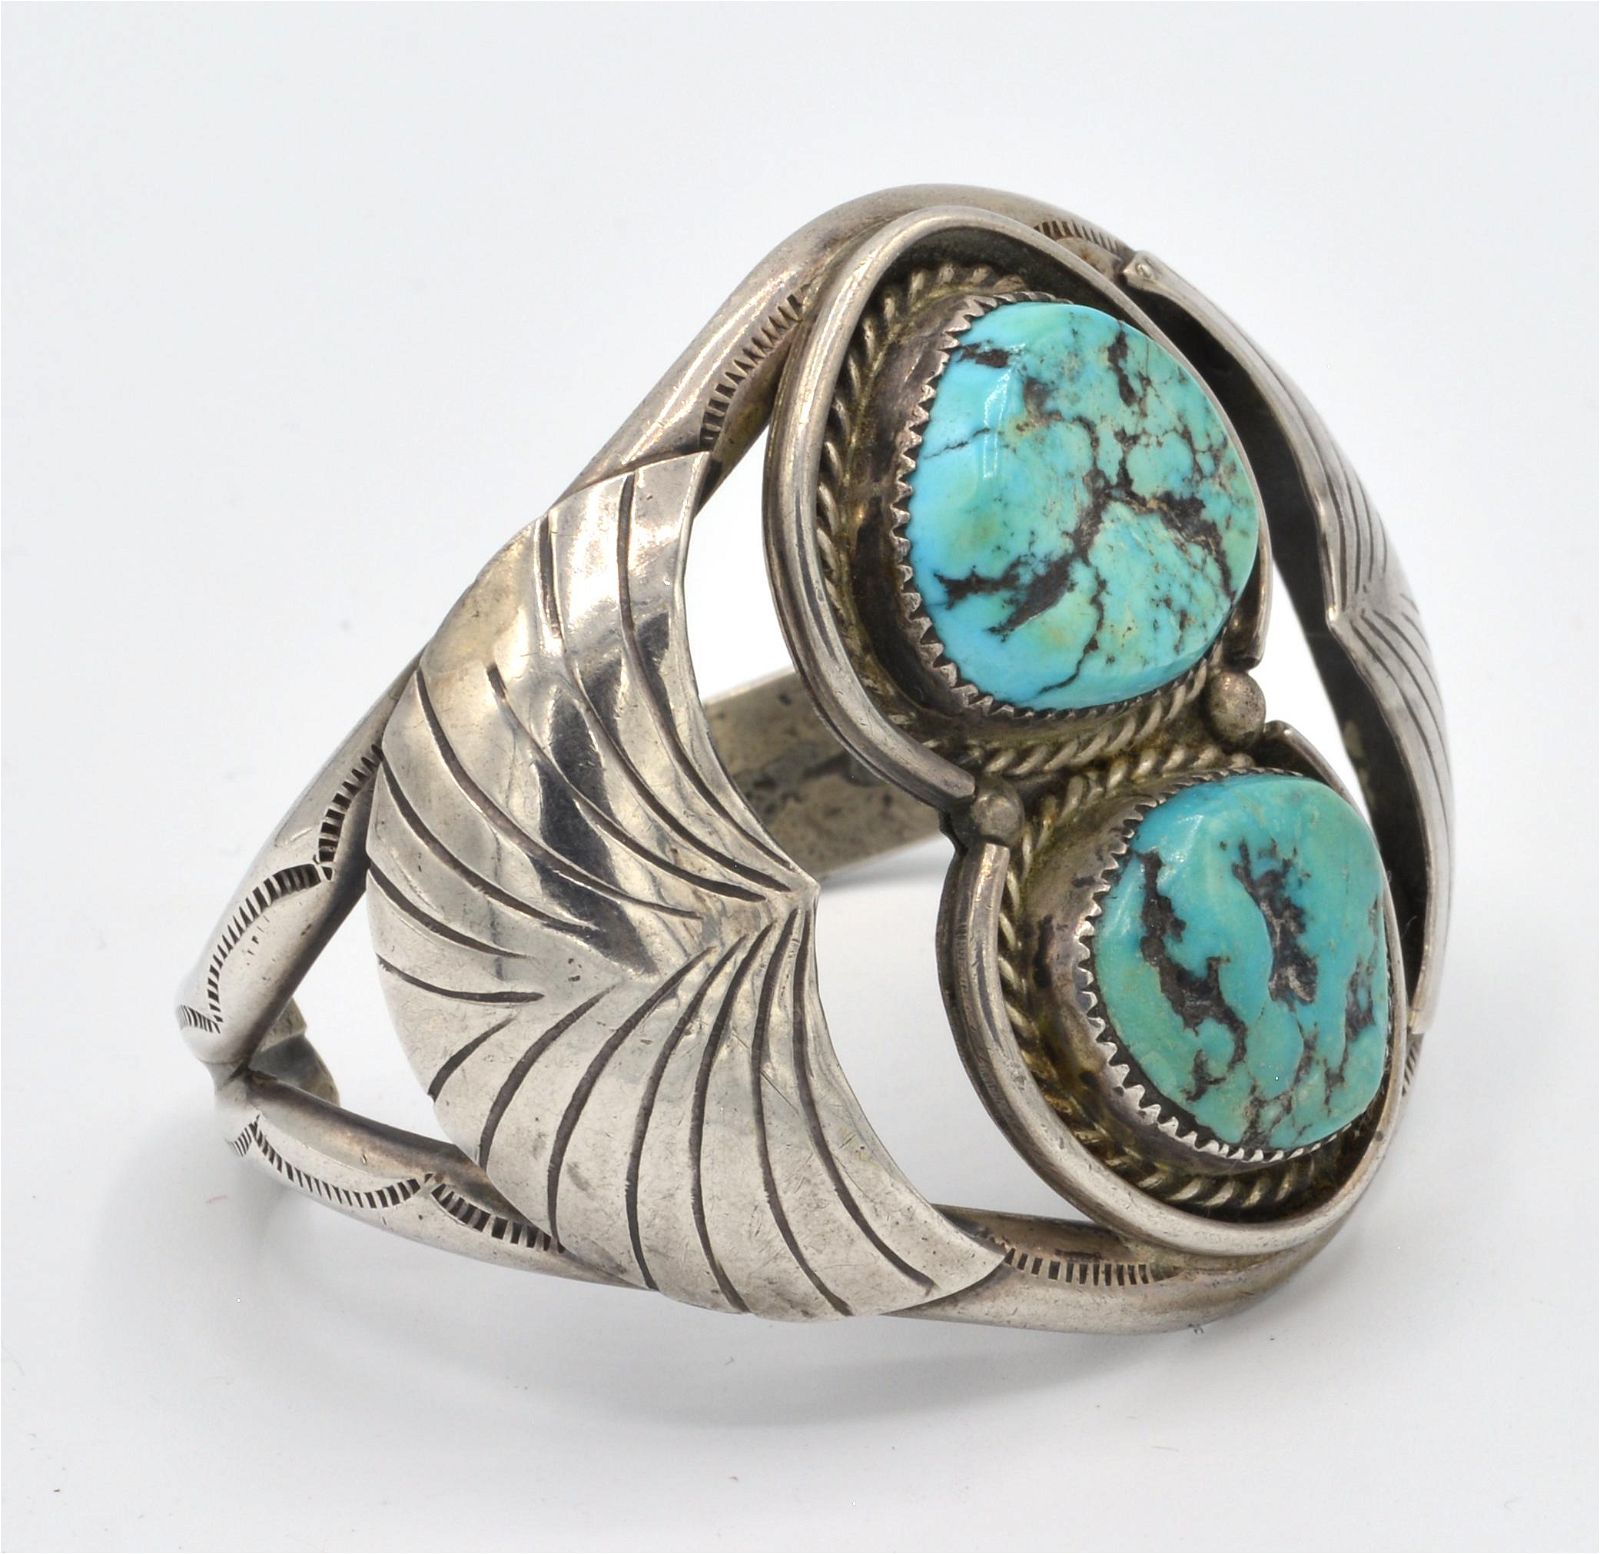 NAVAJO STERLING TURQUOISE CUFF 3d1f76